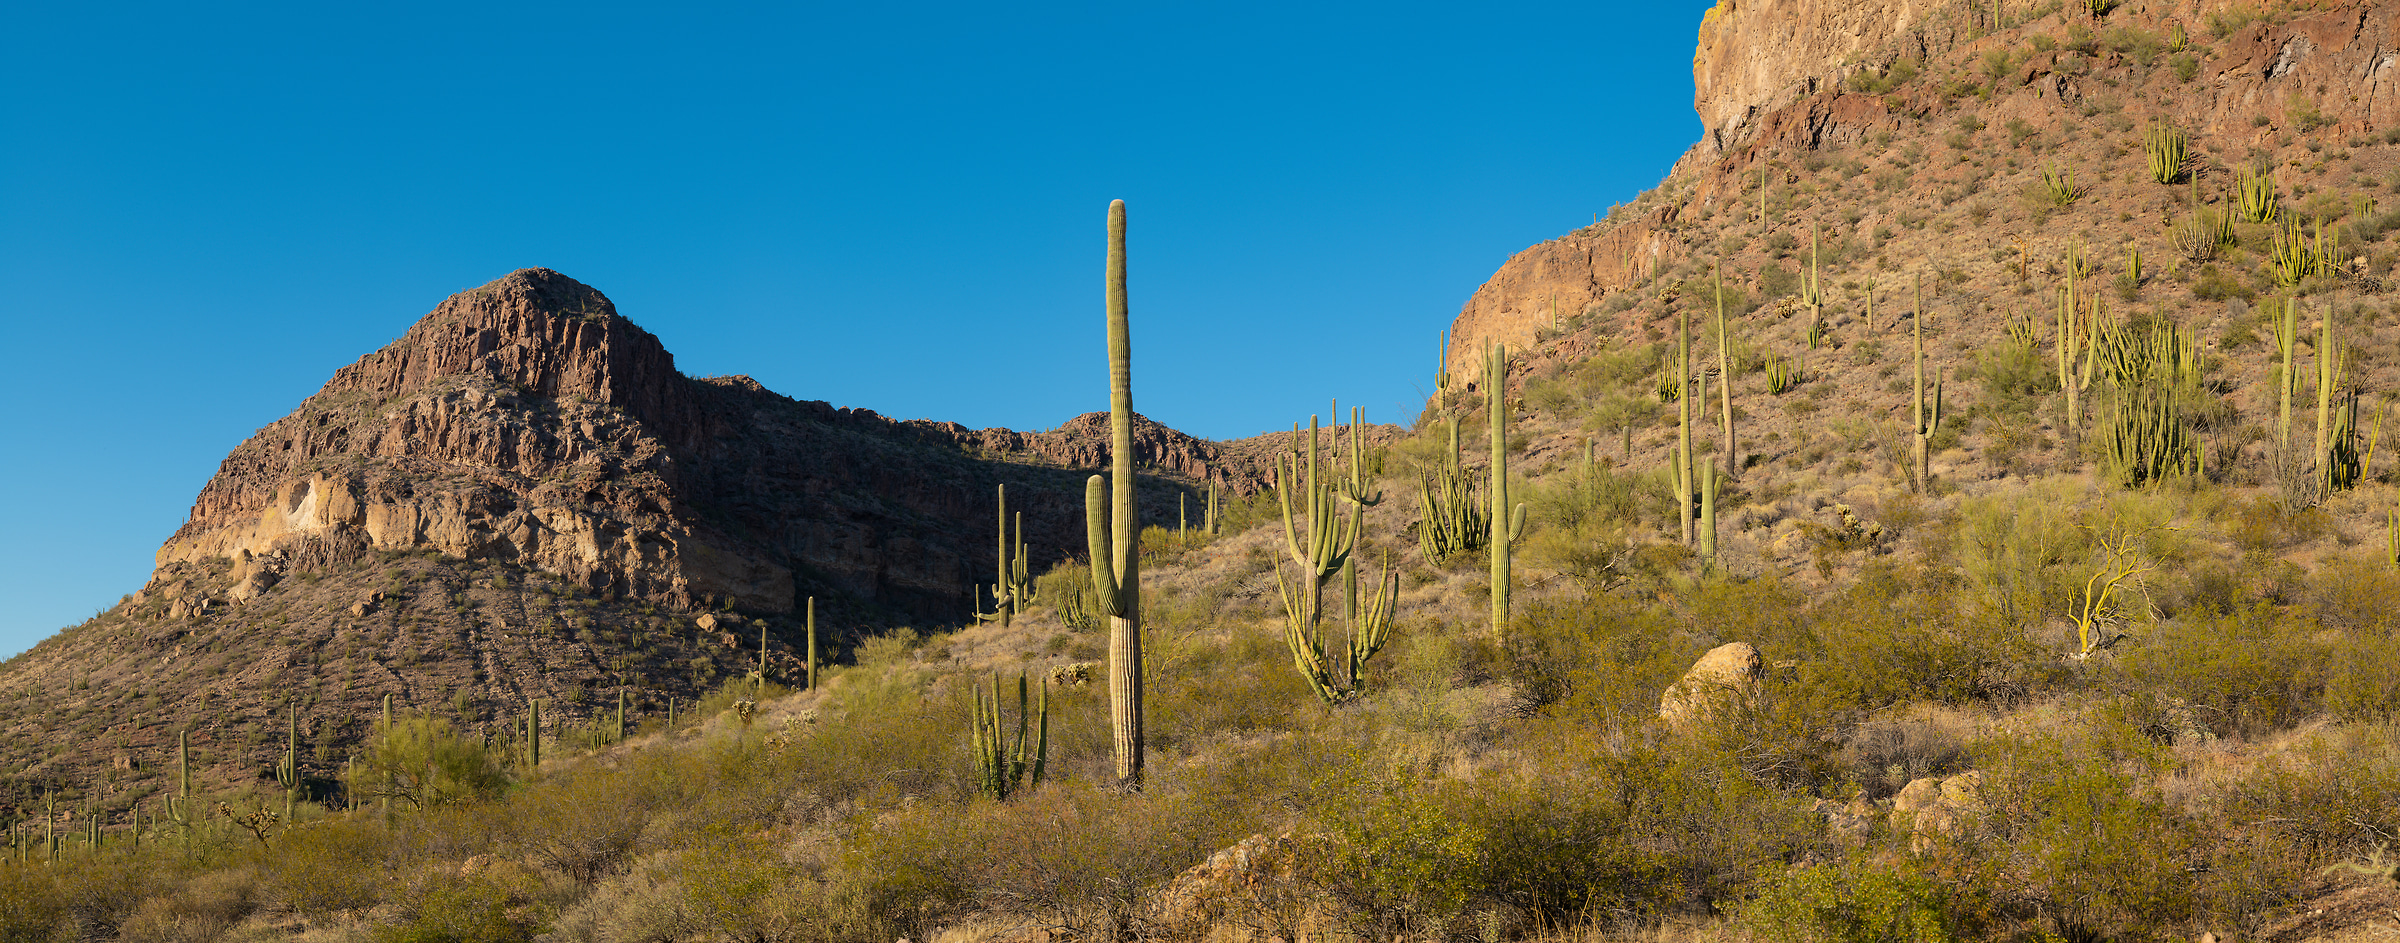 478 megapixels! A very high resolution, large-format VAST photo print of a landscape with cacti; landscape photograph created by Greg Probst in Organ Pipe Cactus National Monument, Arizona